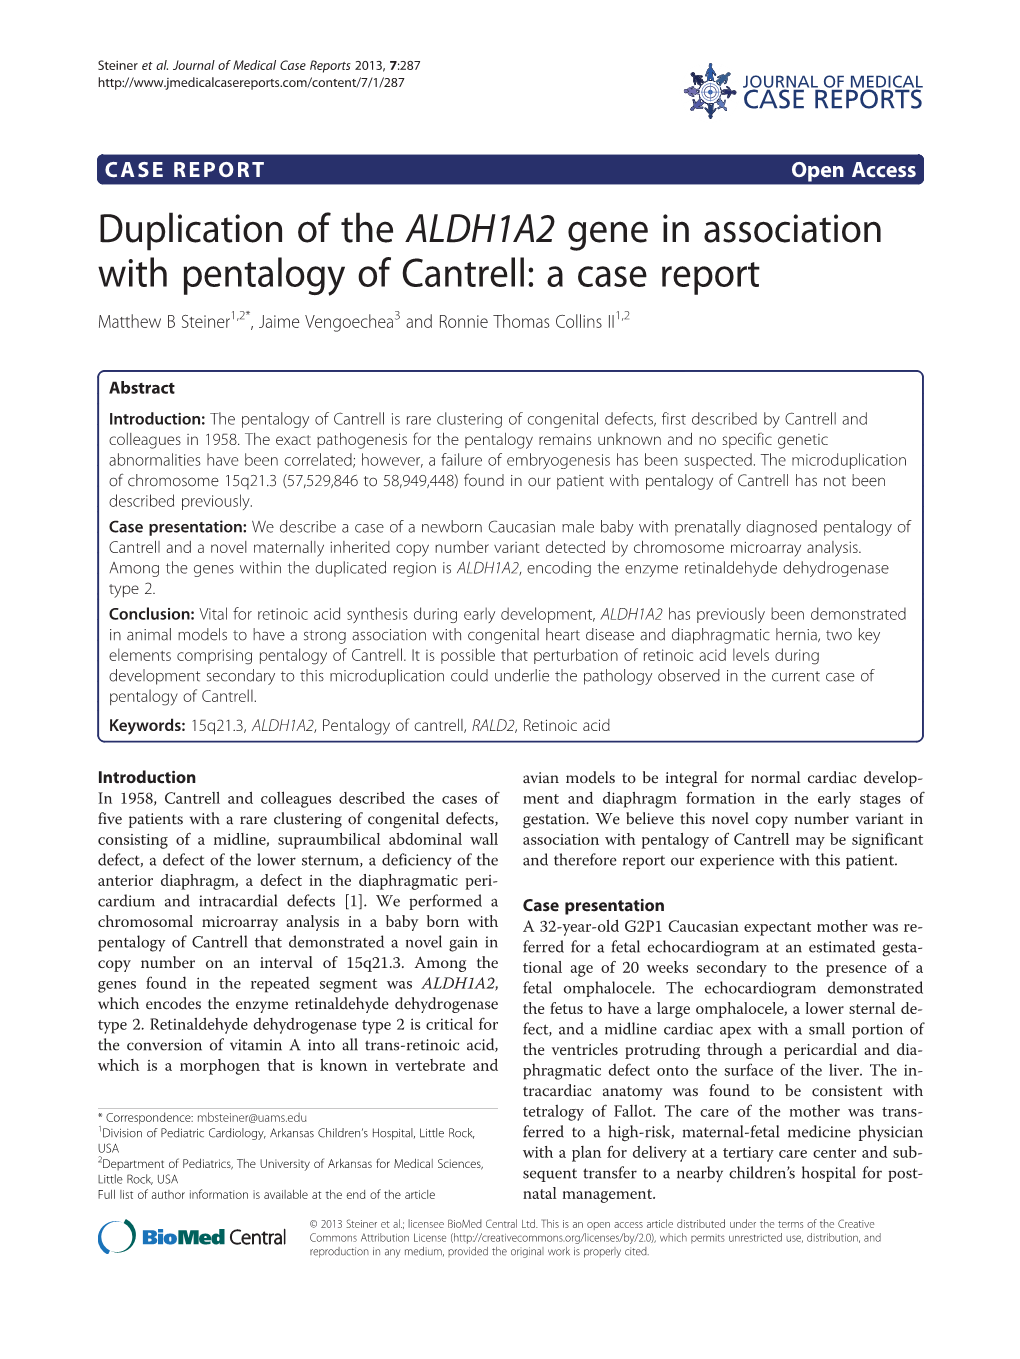 Duplication of the ALDH1A2 Gene in Association with Pentalogy of Cantrell: a Case Report Matthew B Steiner1,2*, Jaime Vengoechea3 and Ronnie Thomas Collins II1,2